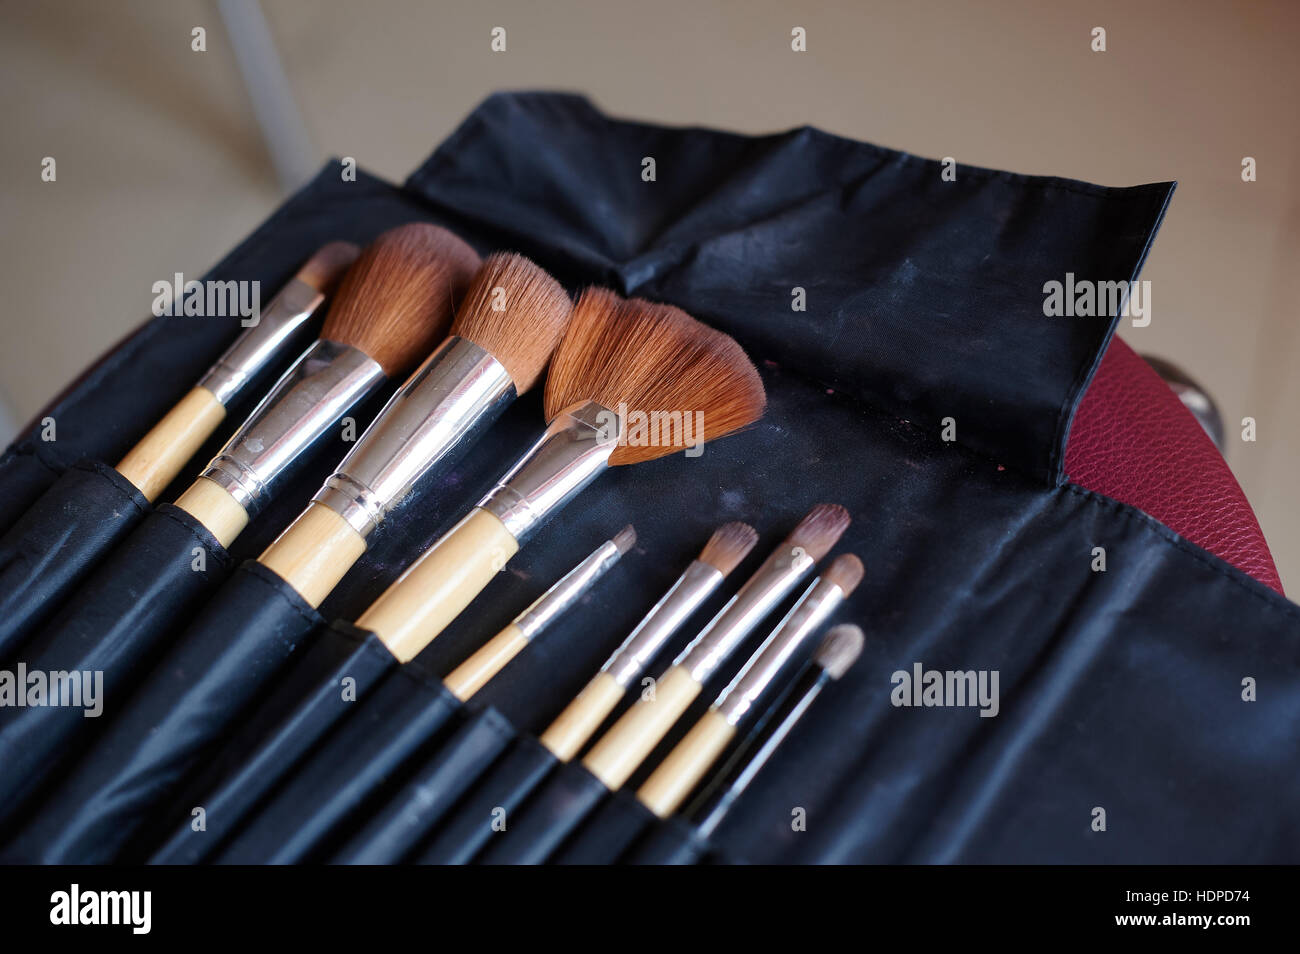 makeup brushes in black leather case Stock Photo